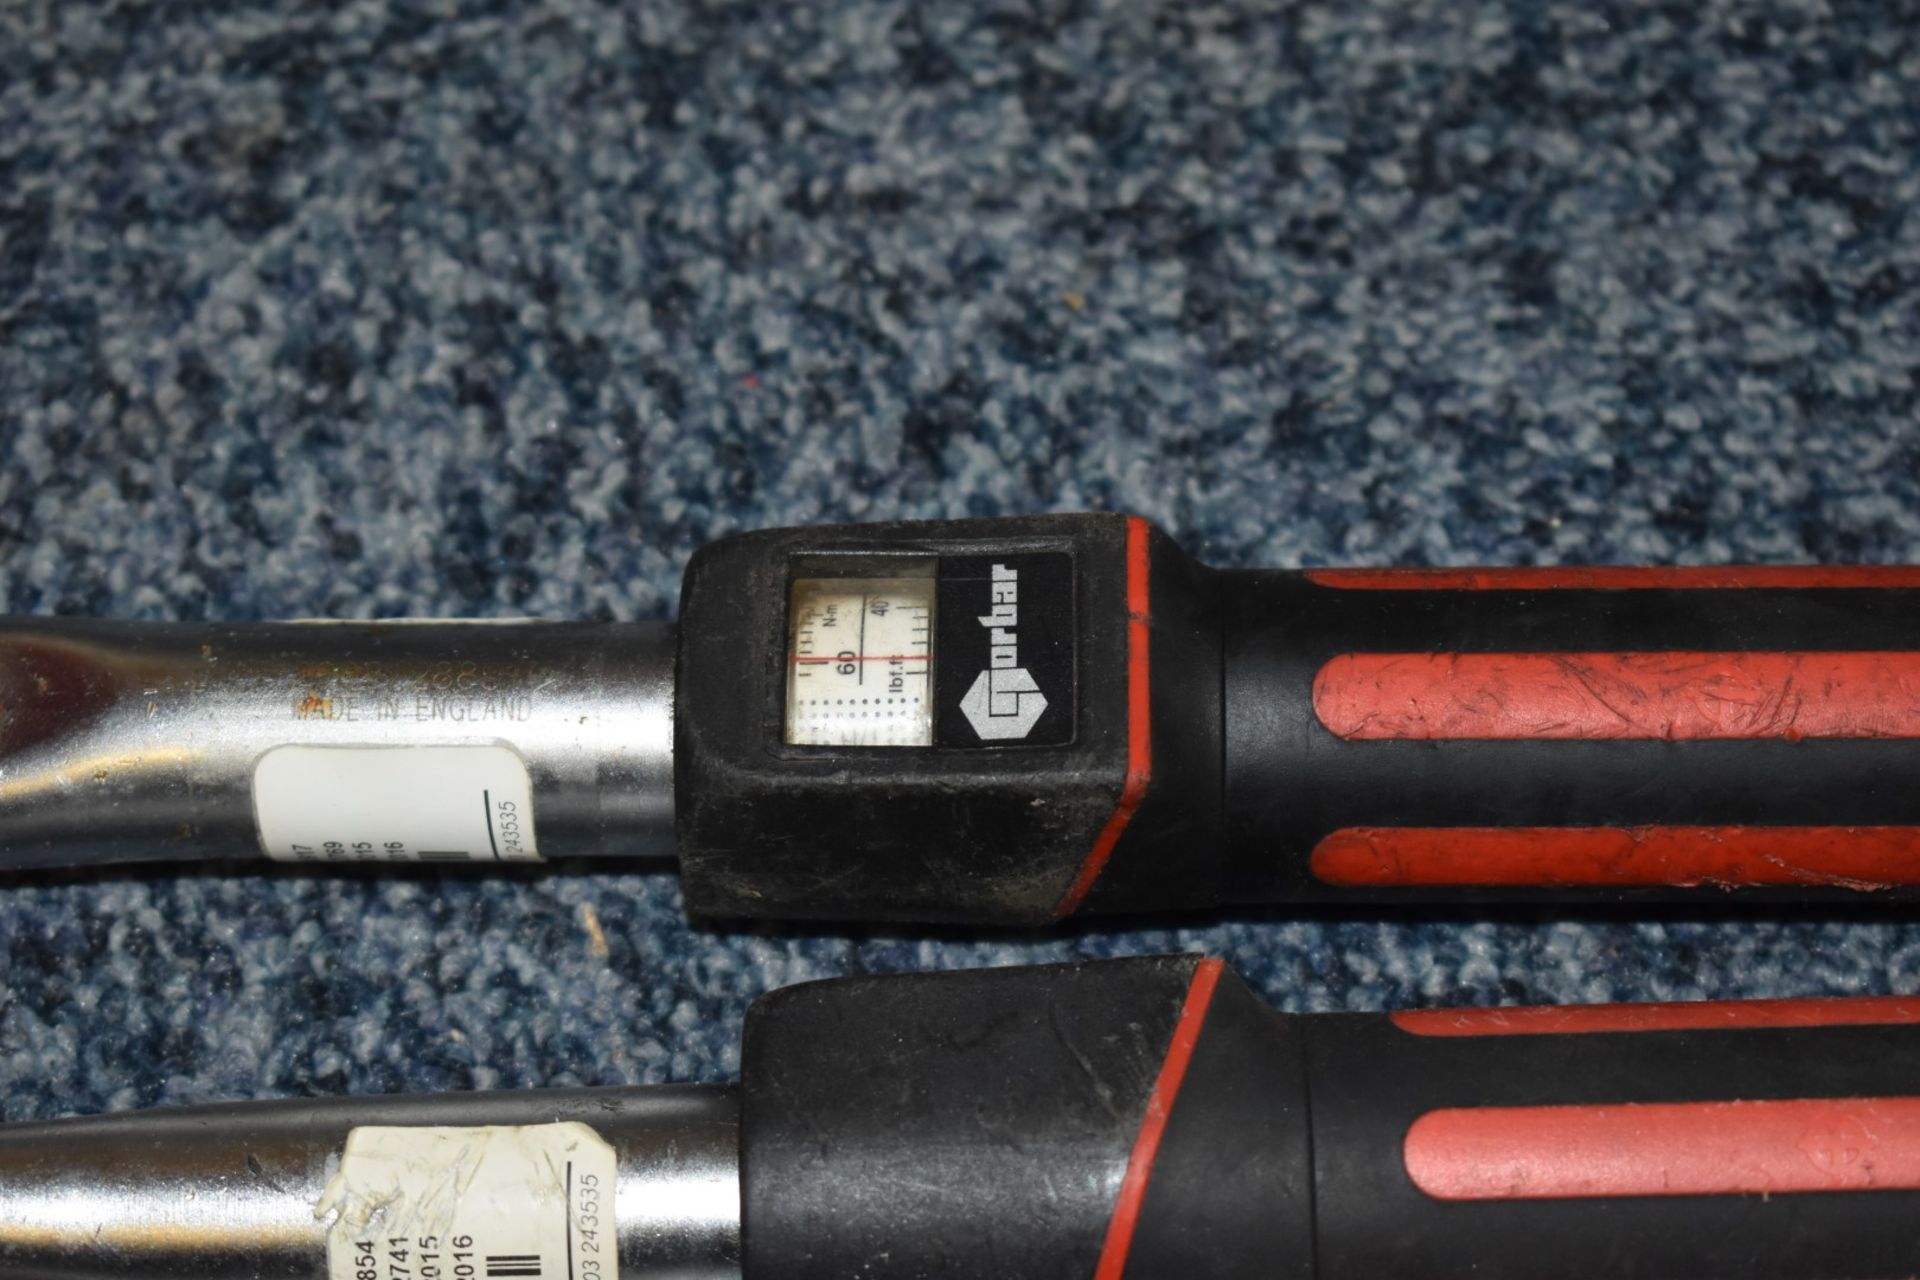 5 x Norbar 60TH Adjustable Torque Wrench Tools With Two Attachments - Approx RRP £550 - Ref WHC173 - Image 5 of 6